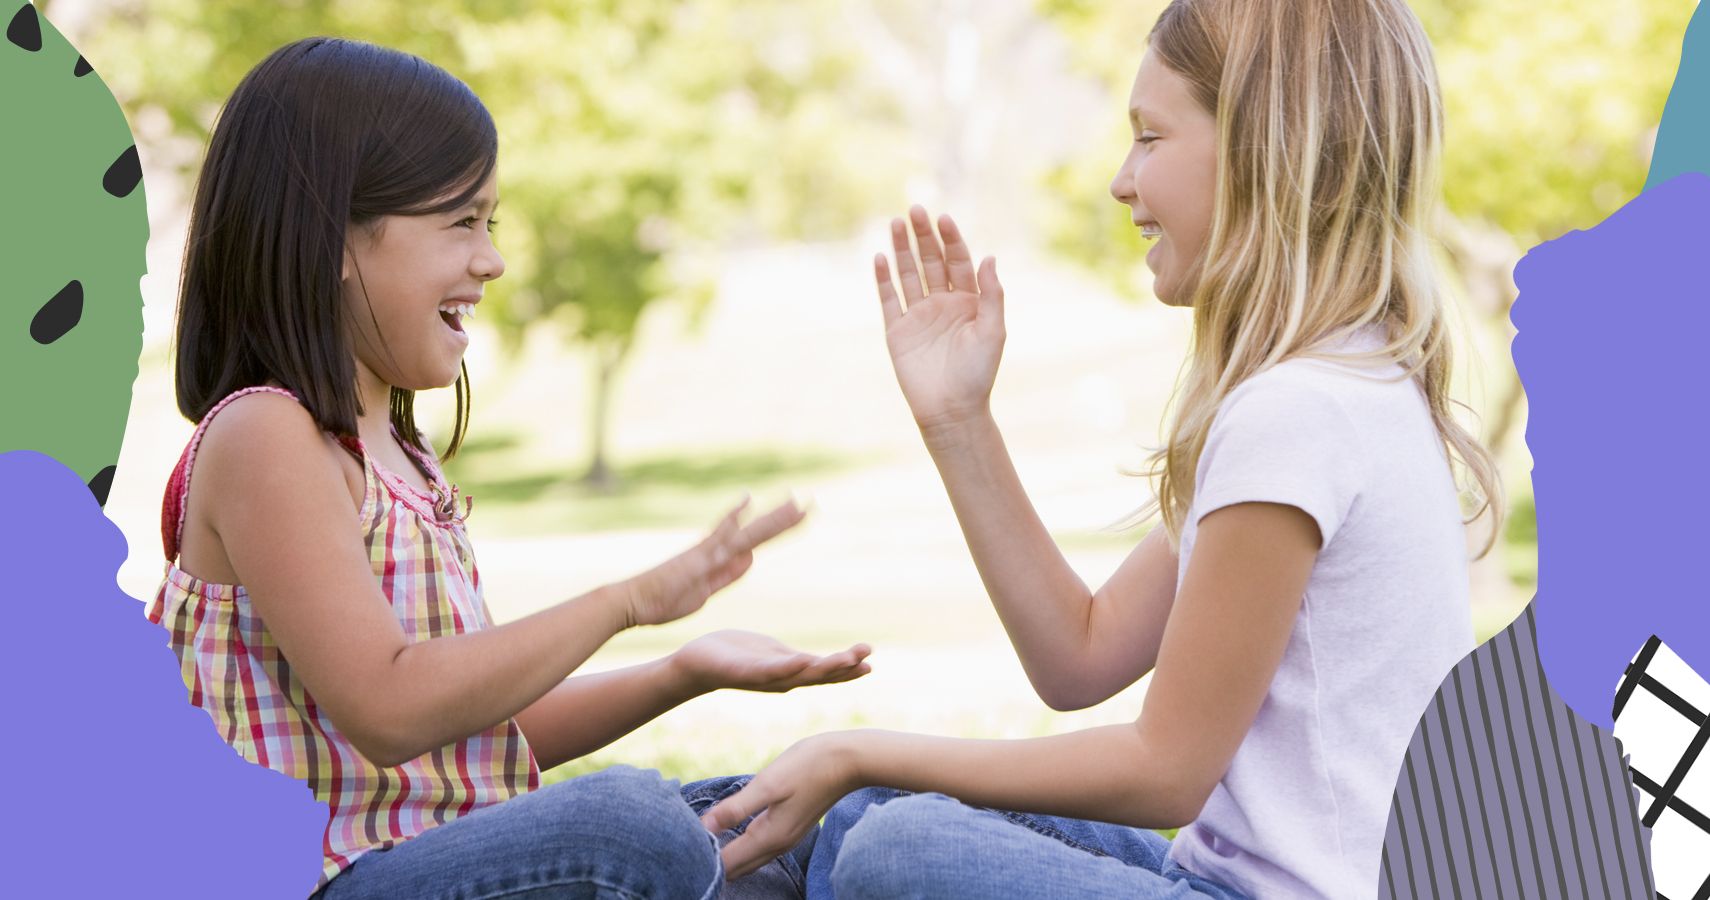 The Benefits Of Clapping Games For Kids